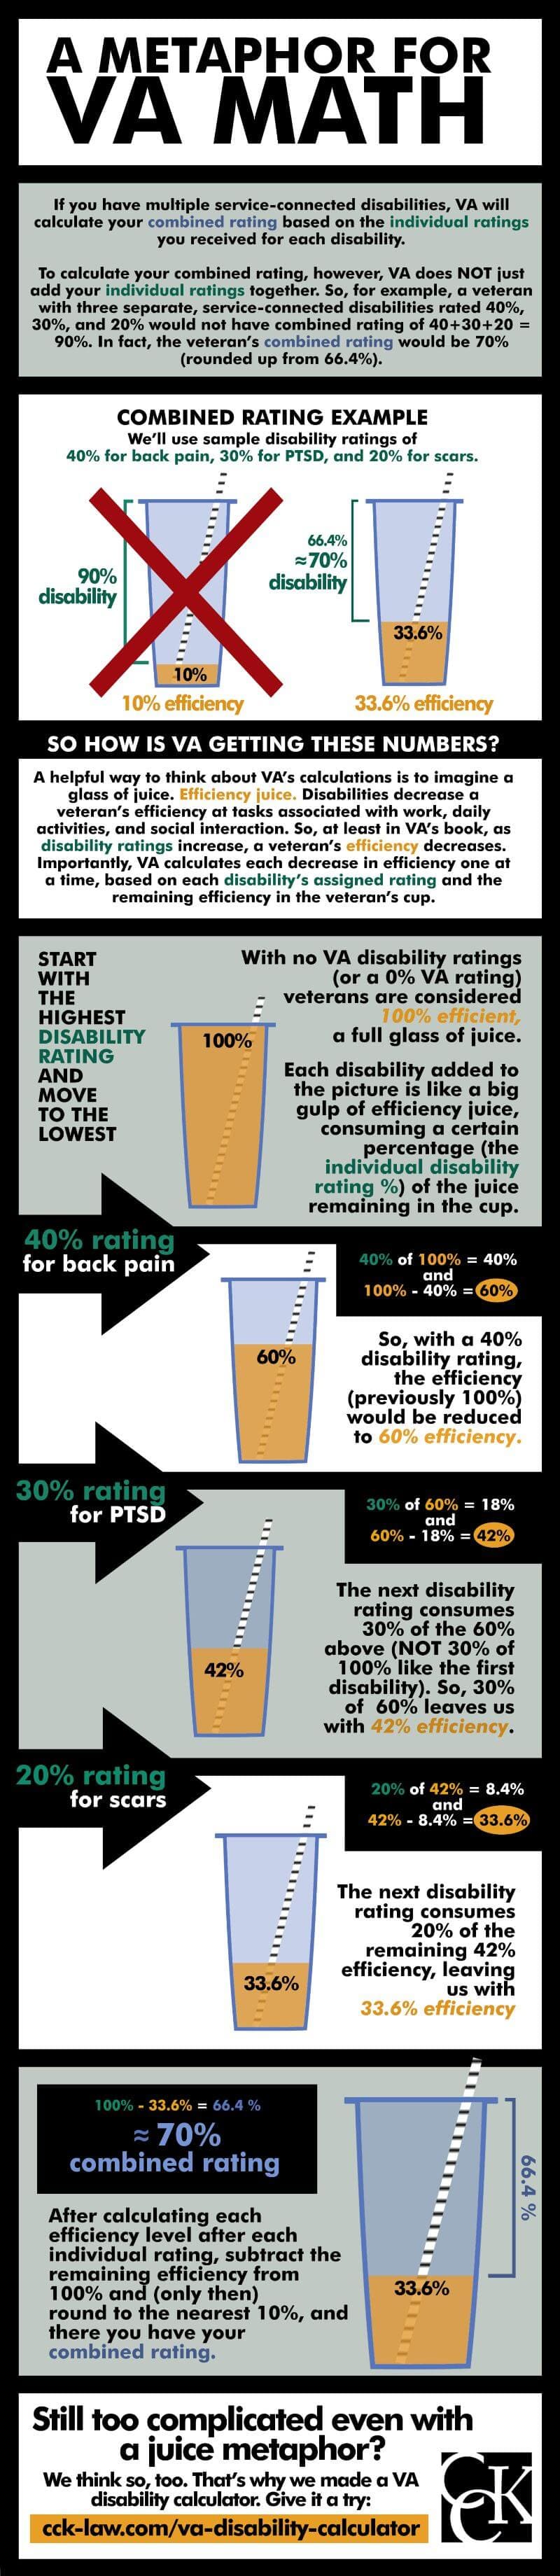 va math and disability ratings explained infographic